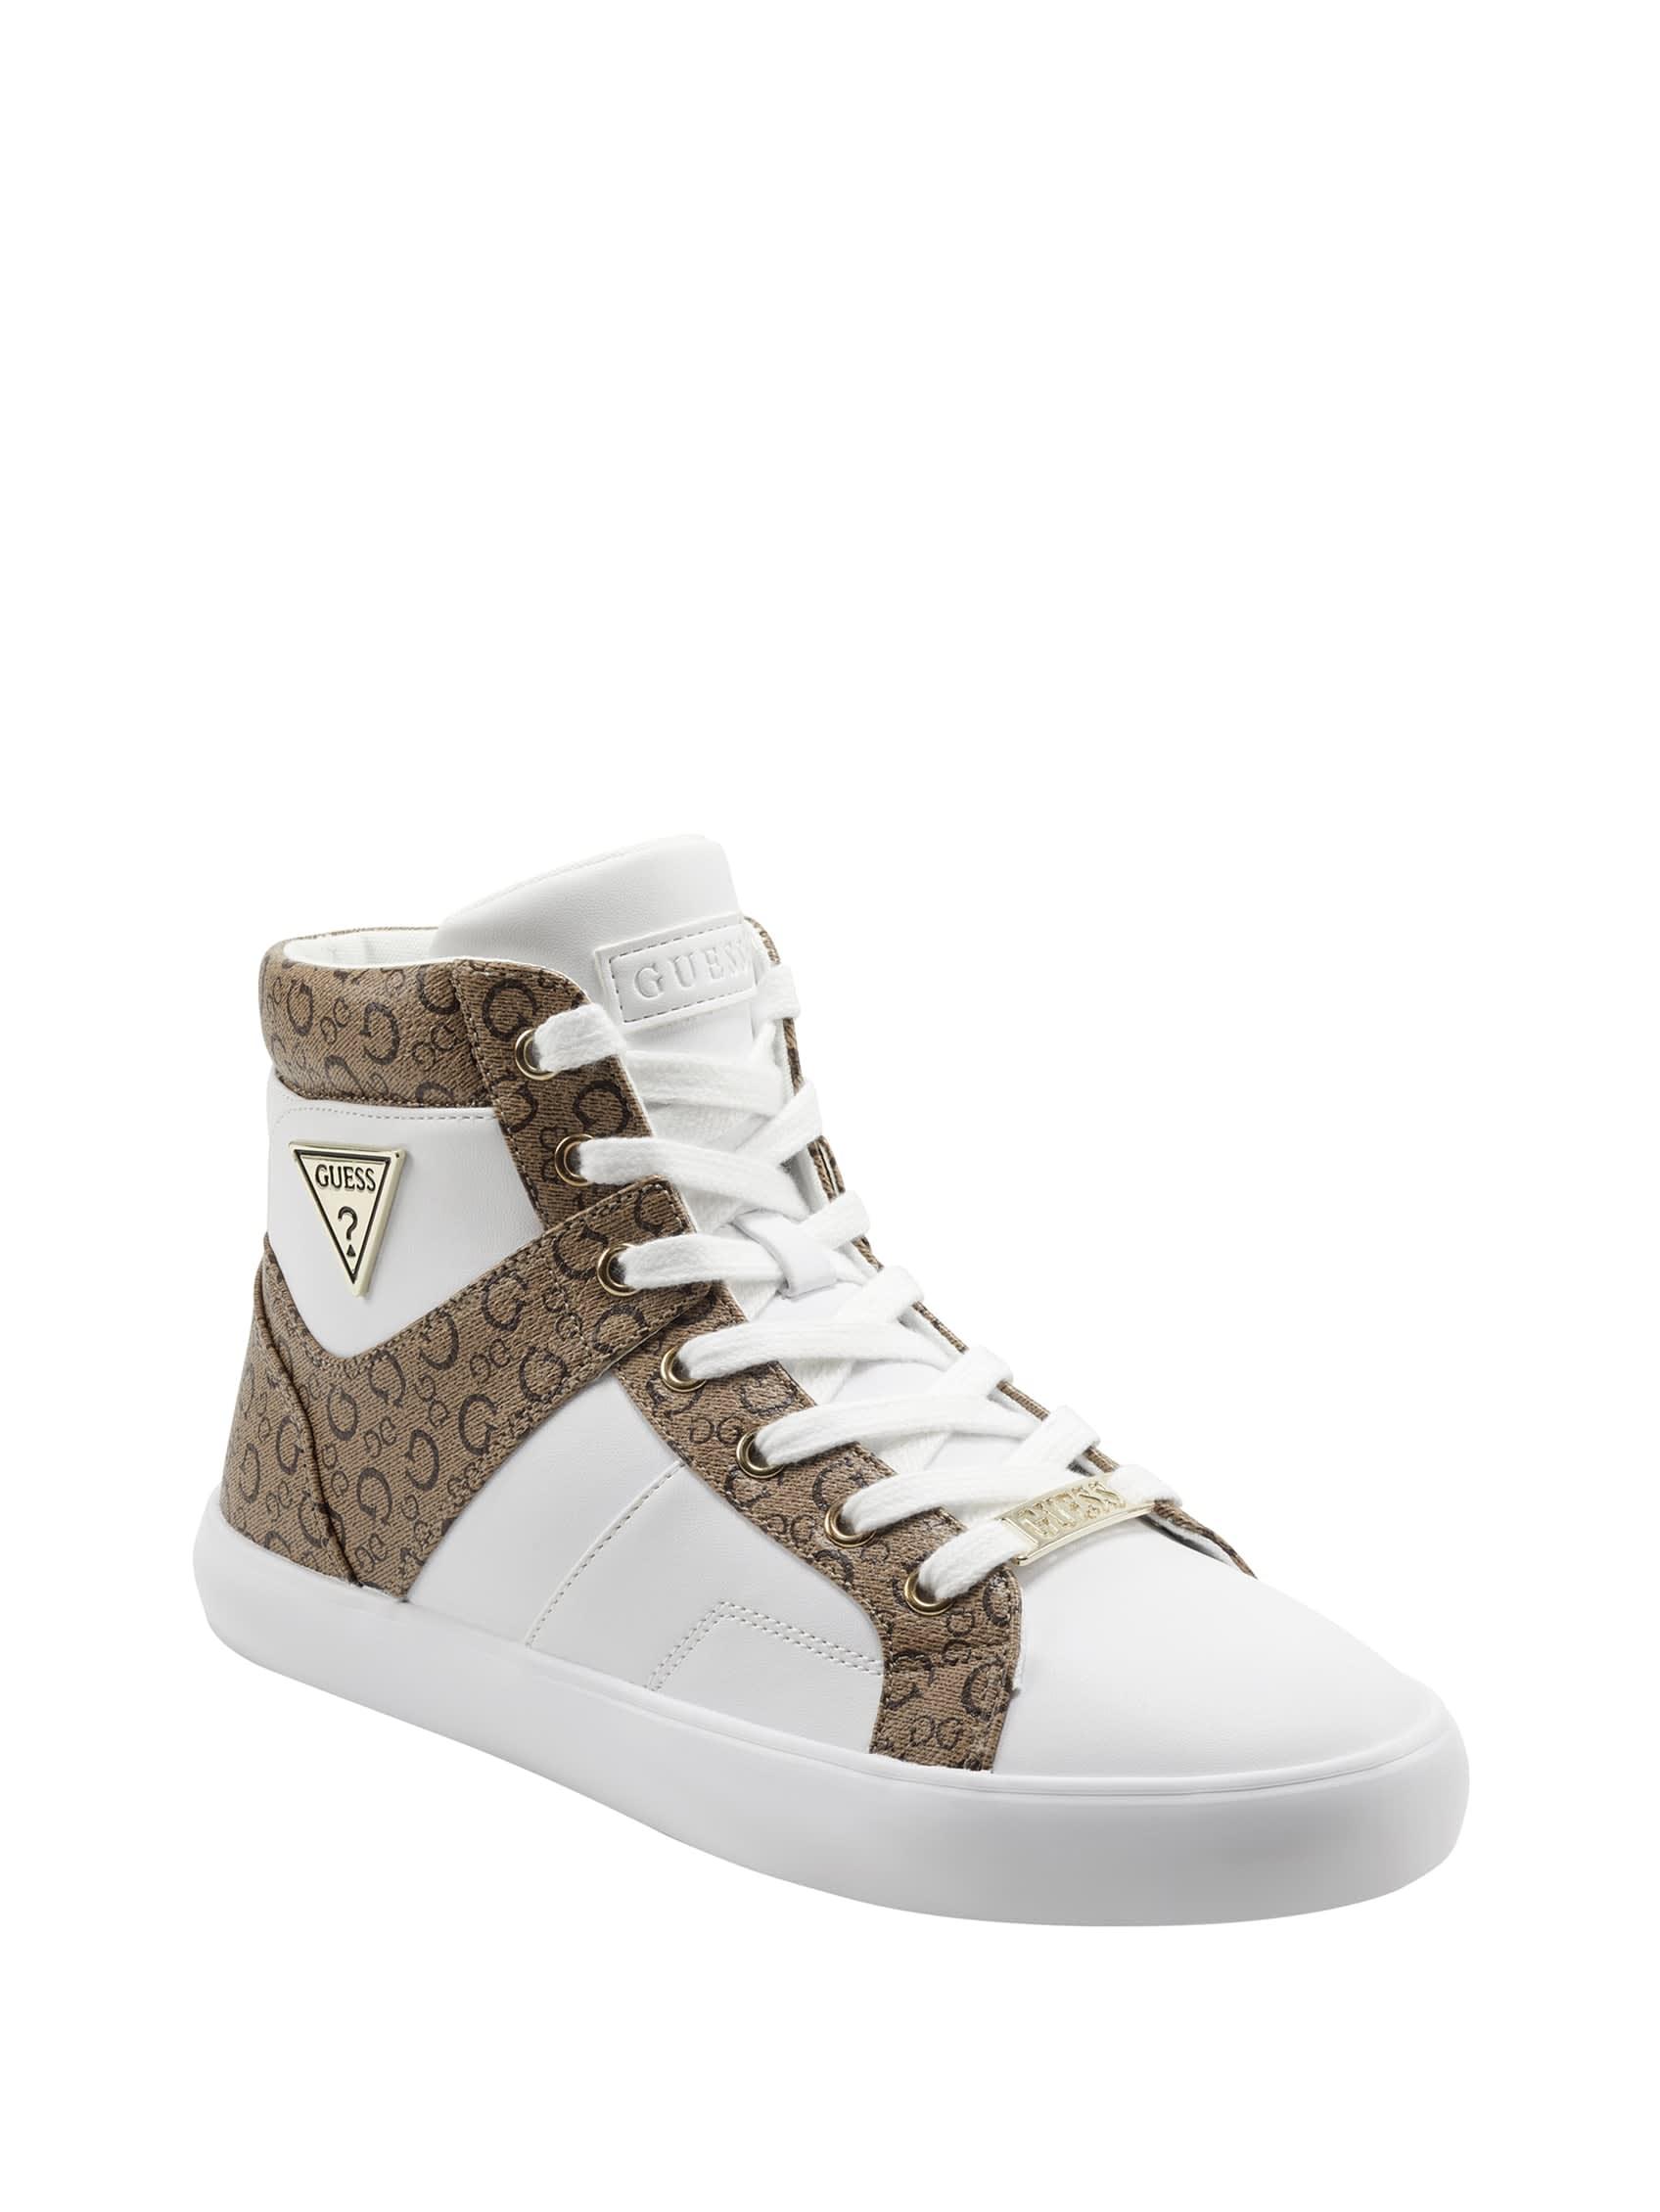 Guess Factory Mariam High-top Sneakers in White | Lyst